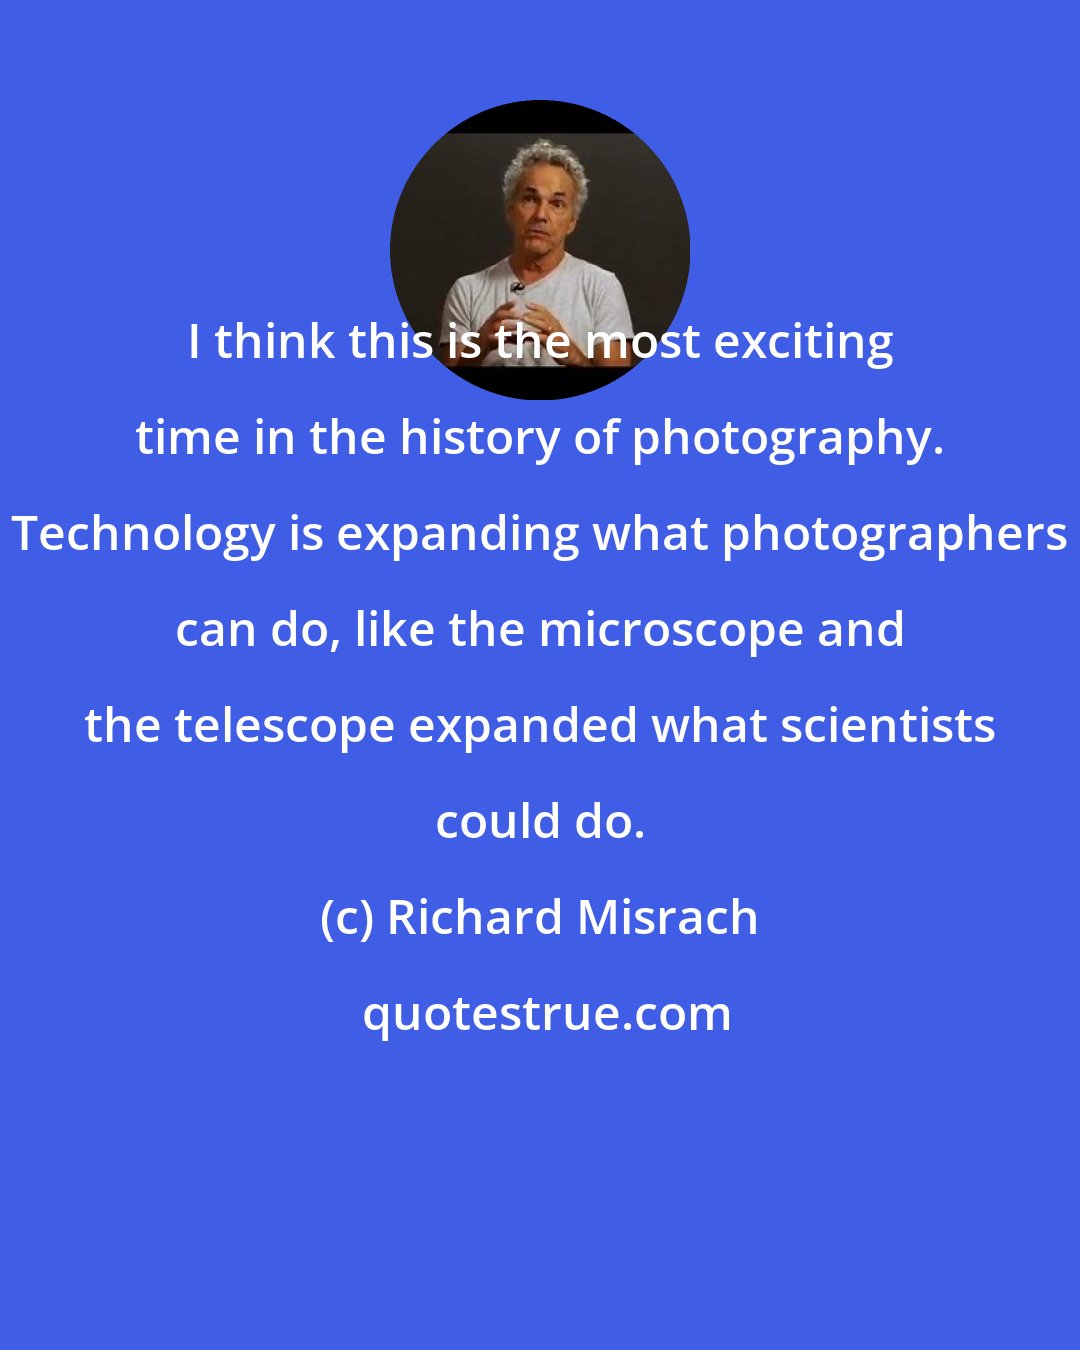 Richard Misrach: I think this is the most exciting time in the history of photography. Technology is expanding what photographers can do, like the microscope and the telescope expanded what scientists could do.